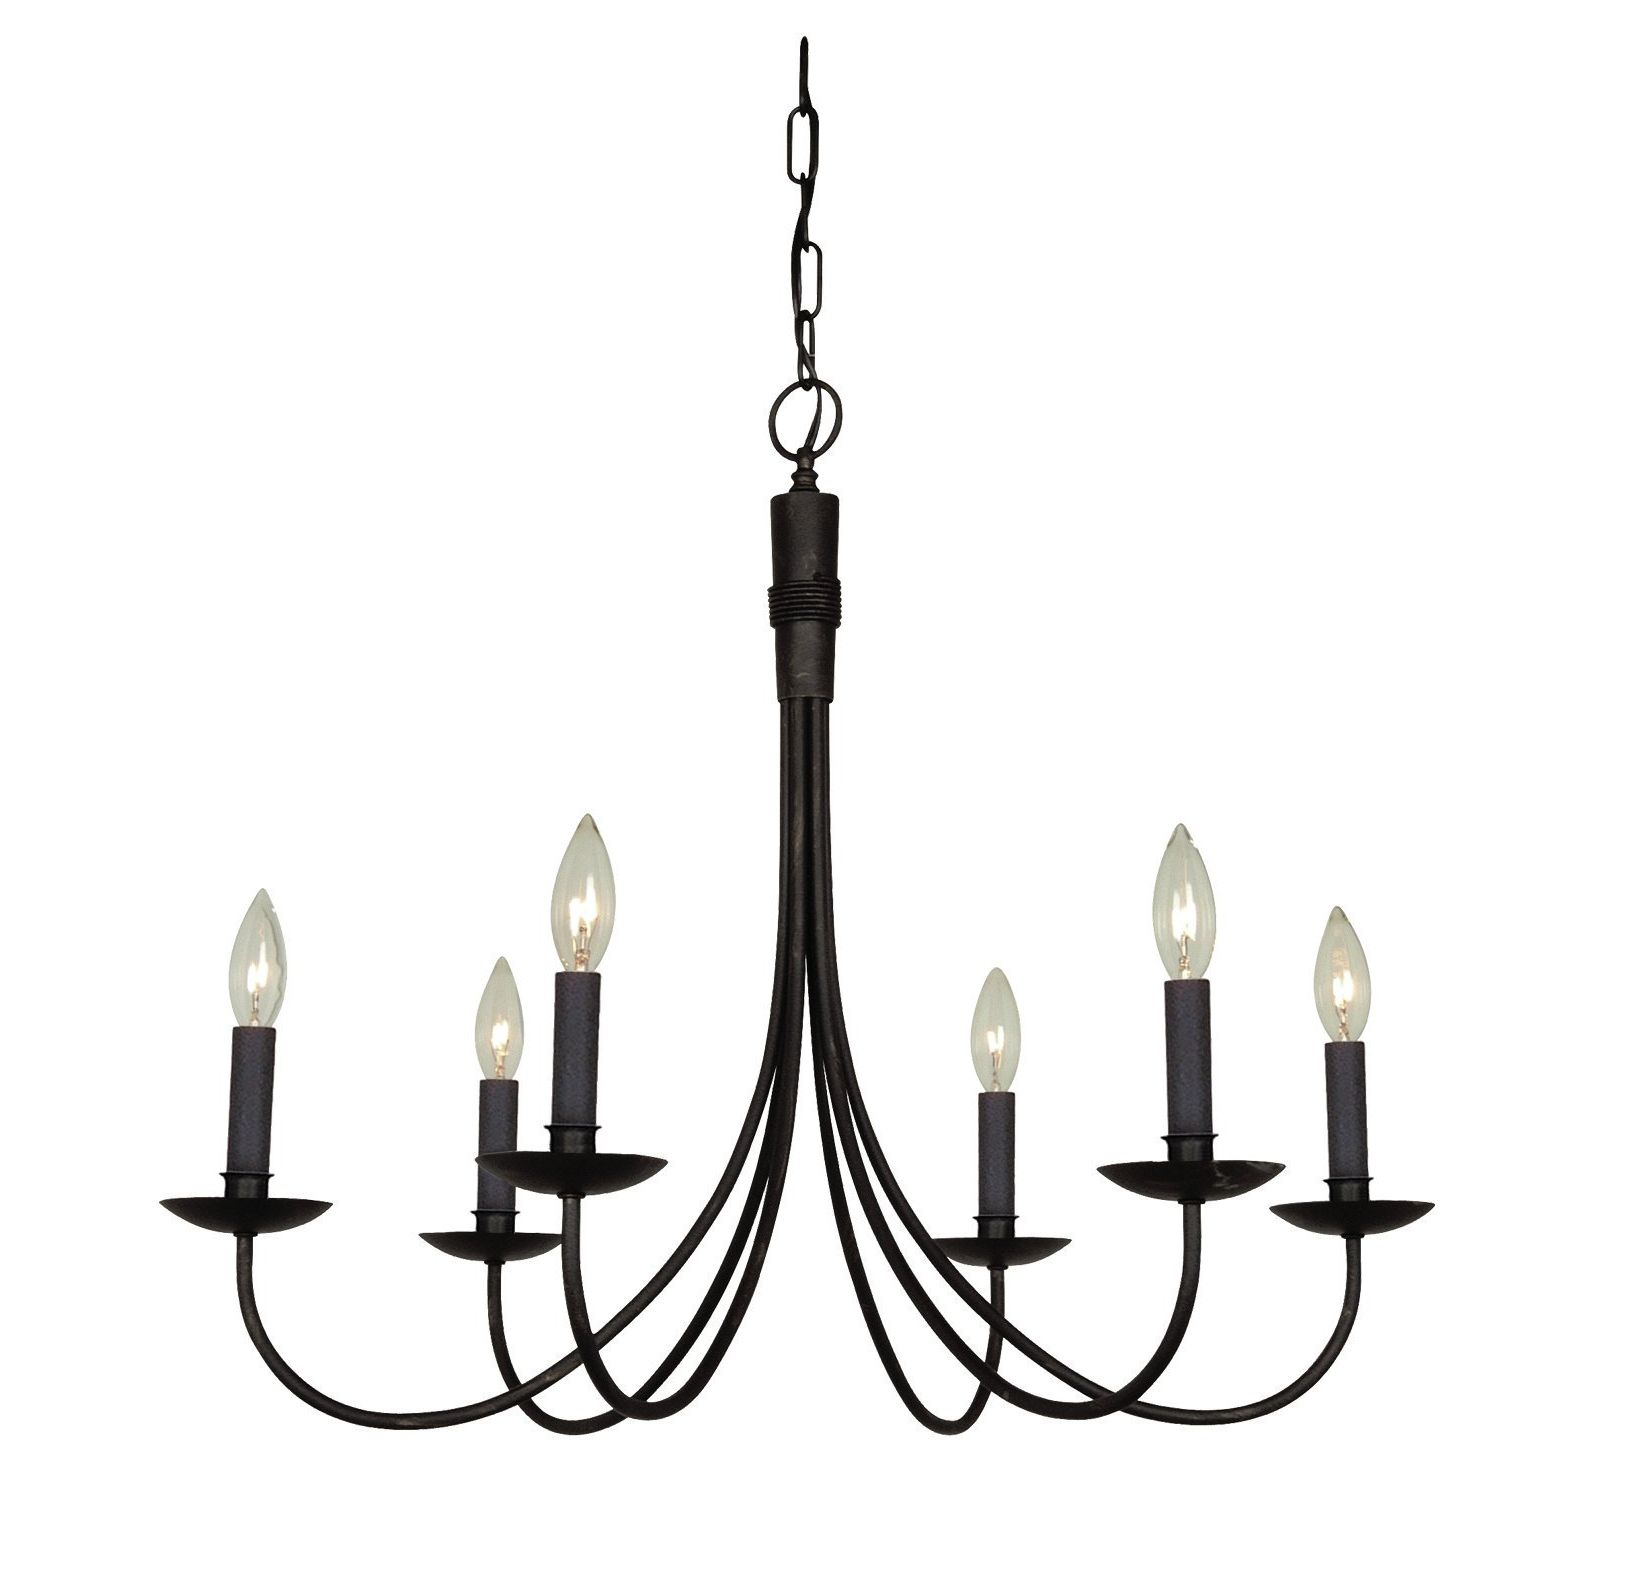 Gaines 9 Light Candle Style Chandeliers For Fashionable Souders 6 Light Candle Style Chandelier (View 18 of 25)